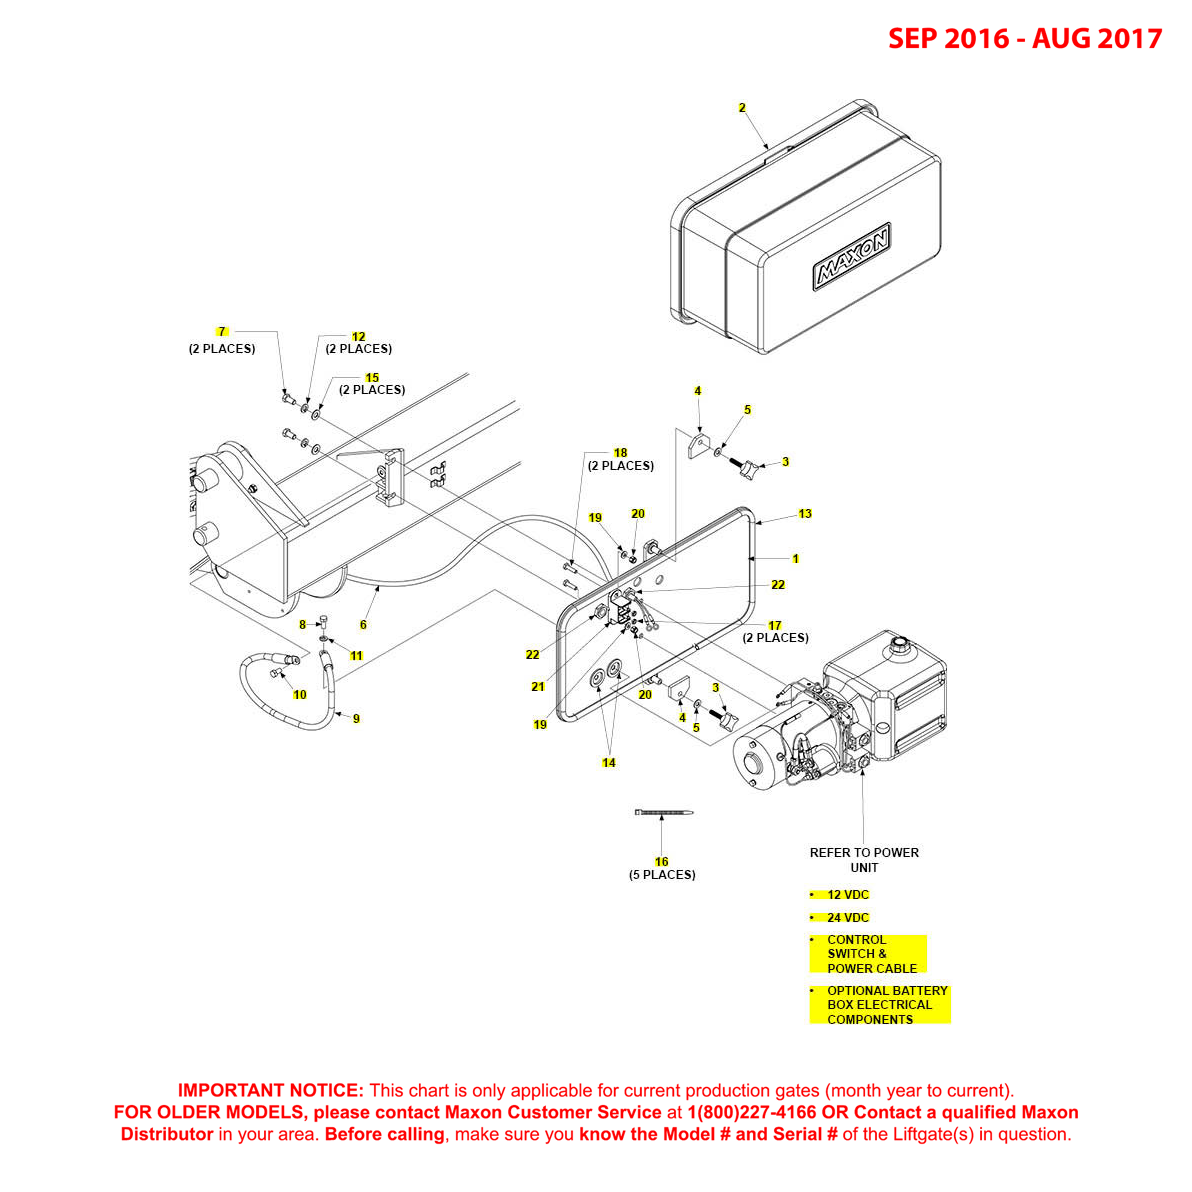 Maxon GPTWR (Sep 2016 - Aug 2017) Pump Cover And Mounting Plate Assembly Diagram